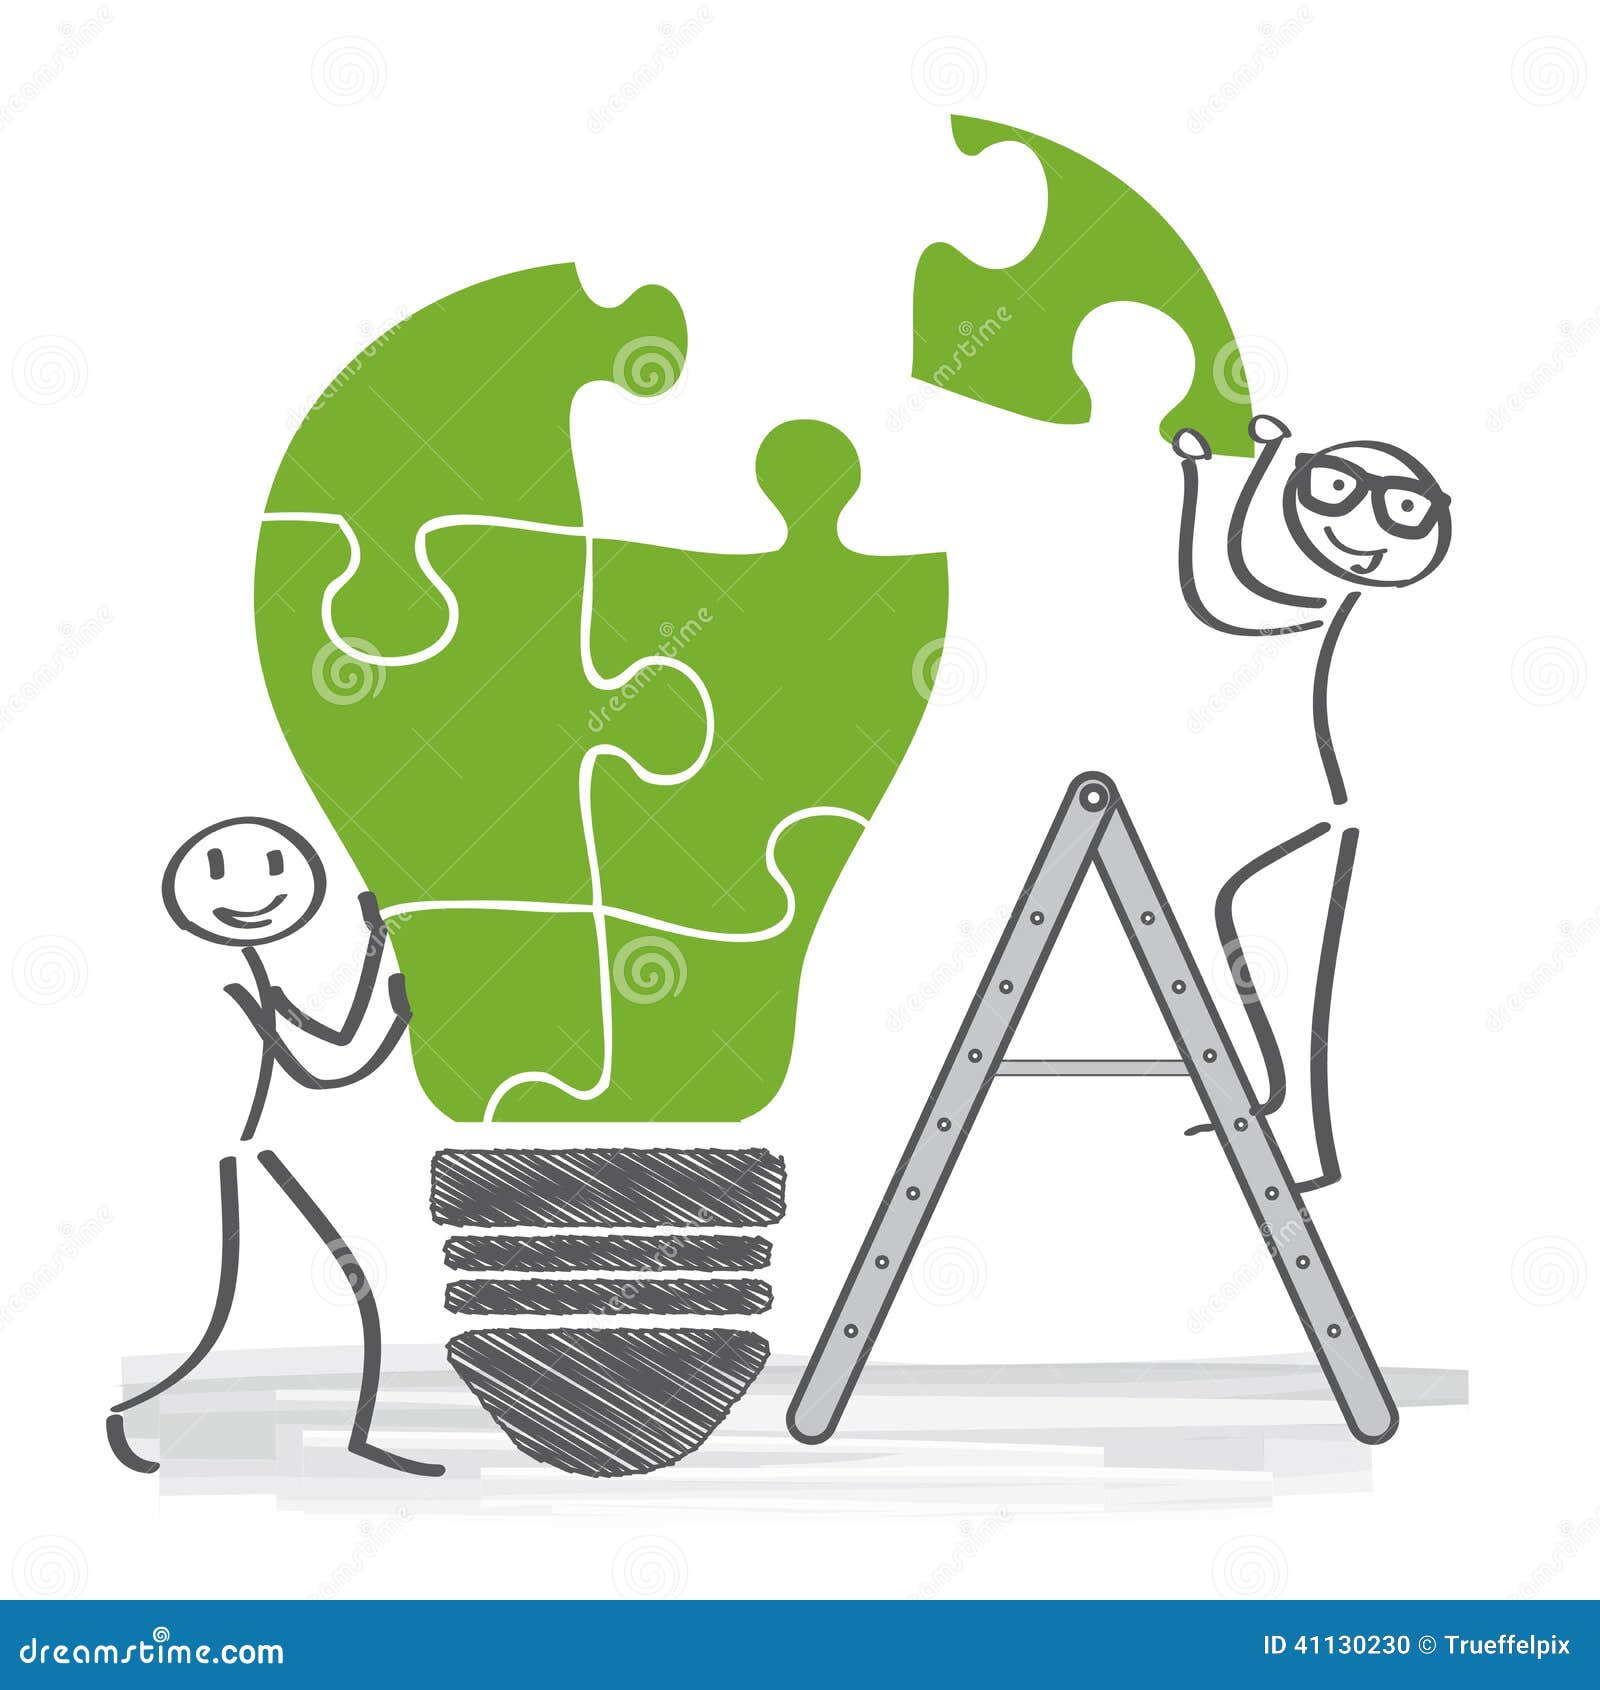 Cooperation Stock Illustrations 326 428 Cooperation Stock Illustrations Vectors Clipart Dreamstime